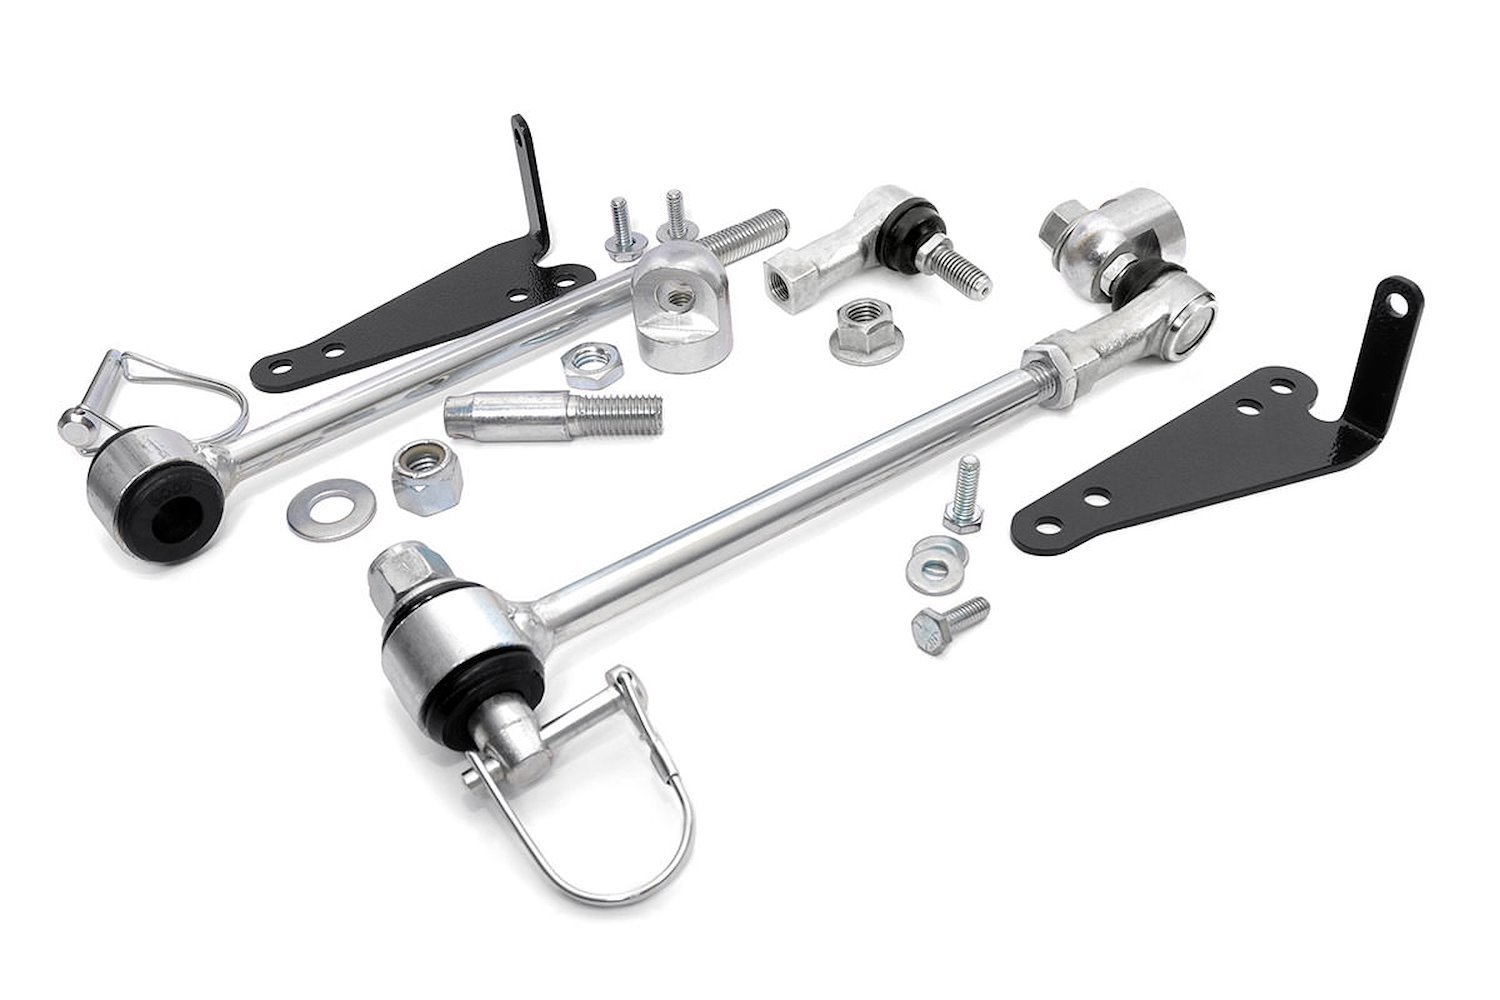 1129 Front Sway Bar Quick Disconnects for 2.5-inch Lifts